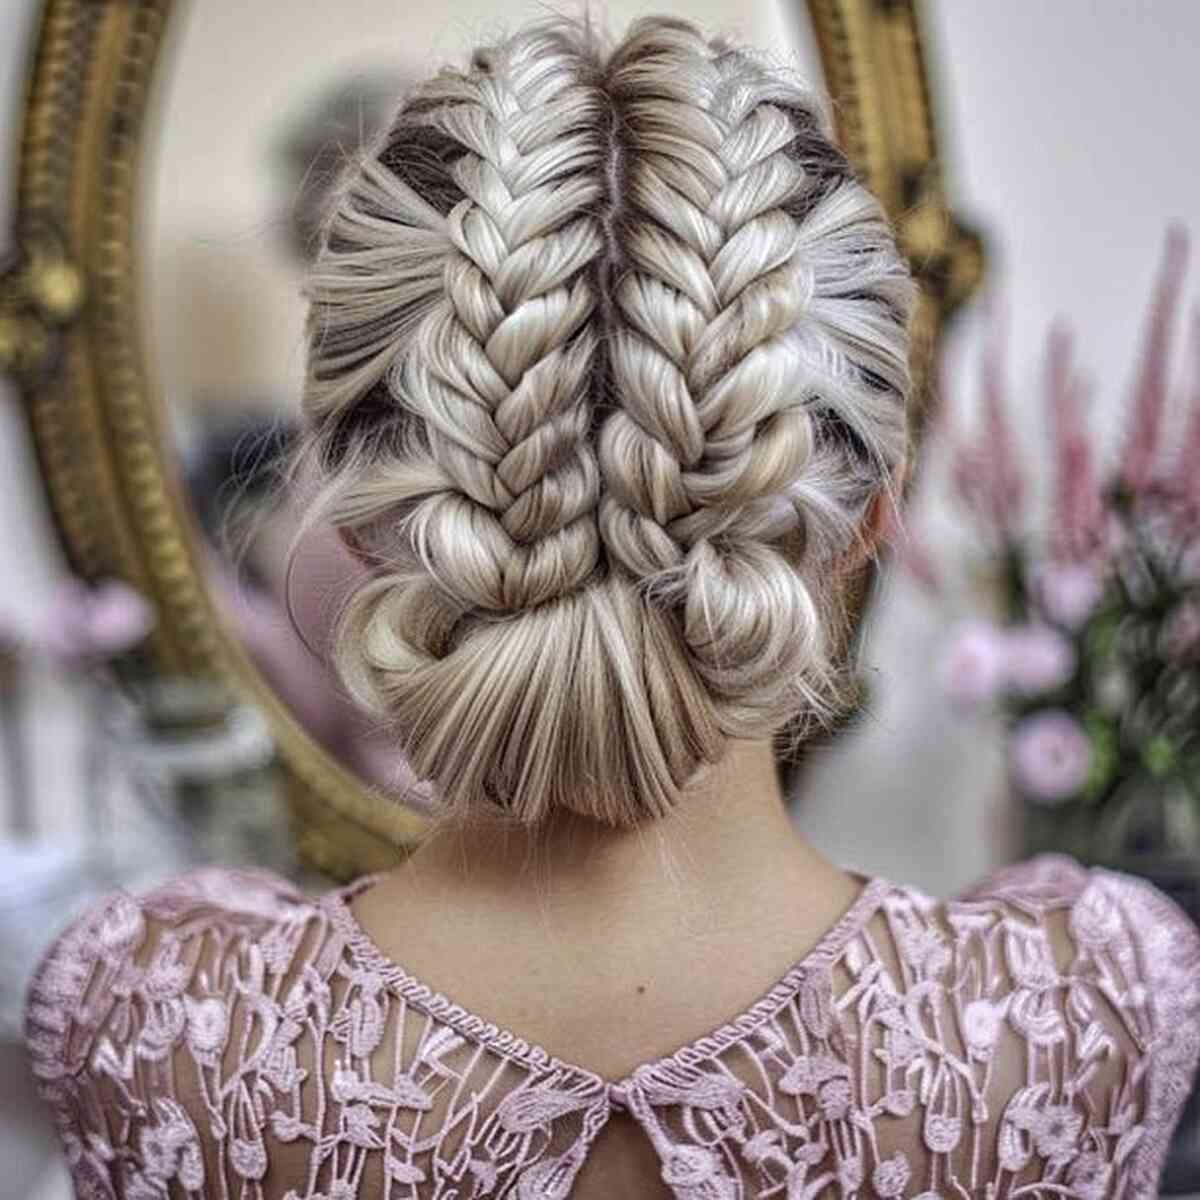 Stylish Double Braided Bun Prom Hairstyle for Long Hair